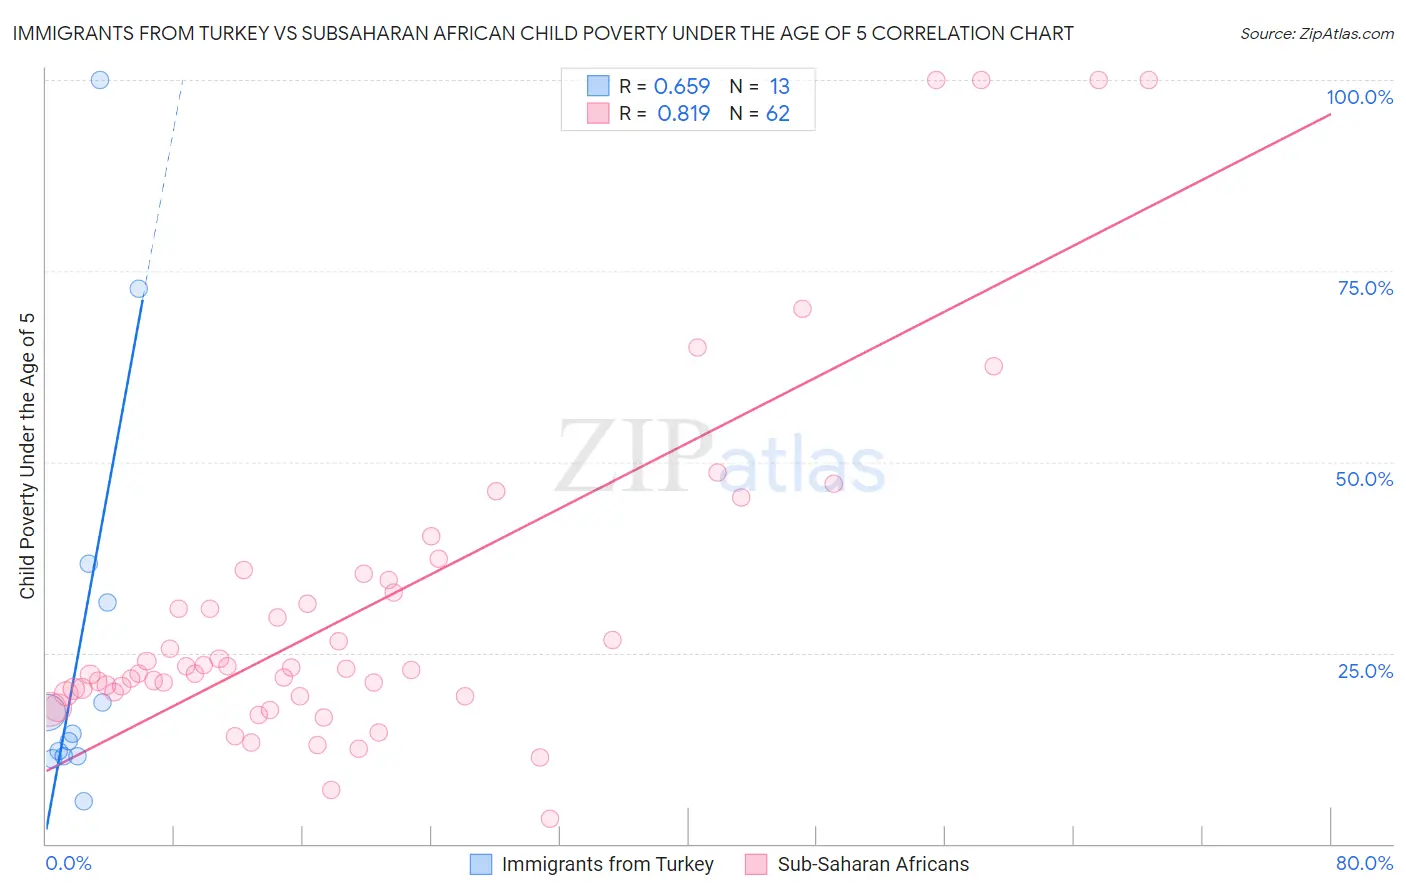 Immigrants from Turkey vs Subsaharan African Child Poverty Under the Age of 5